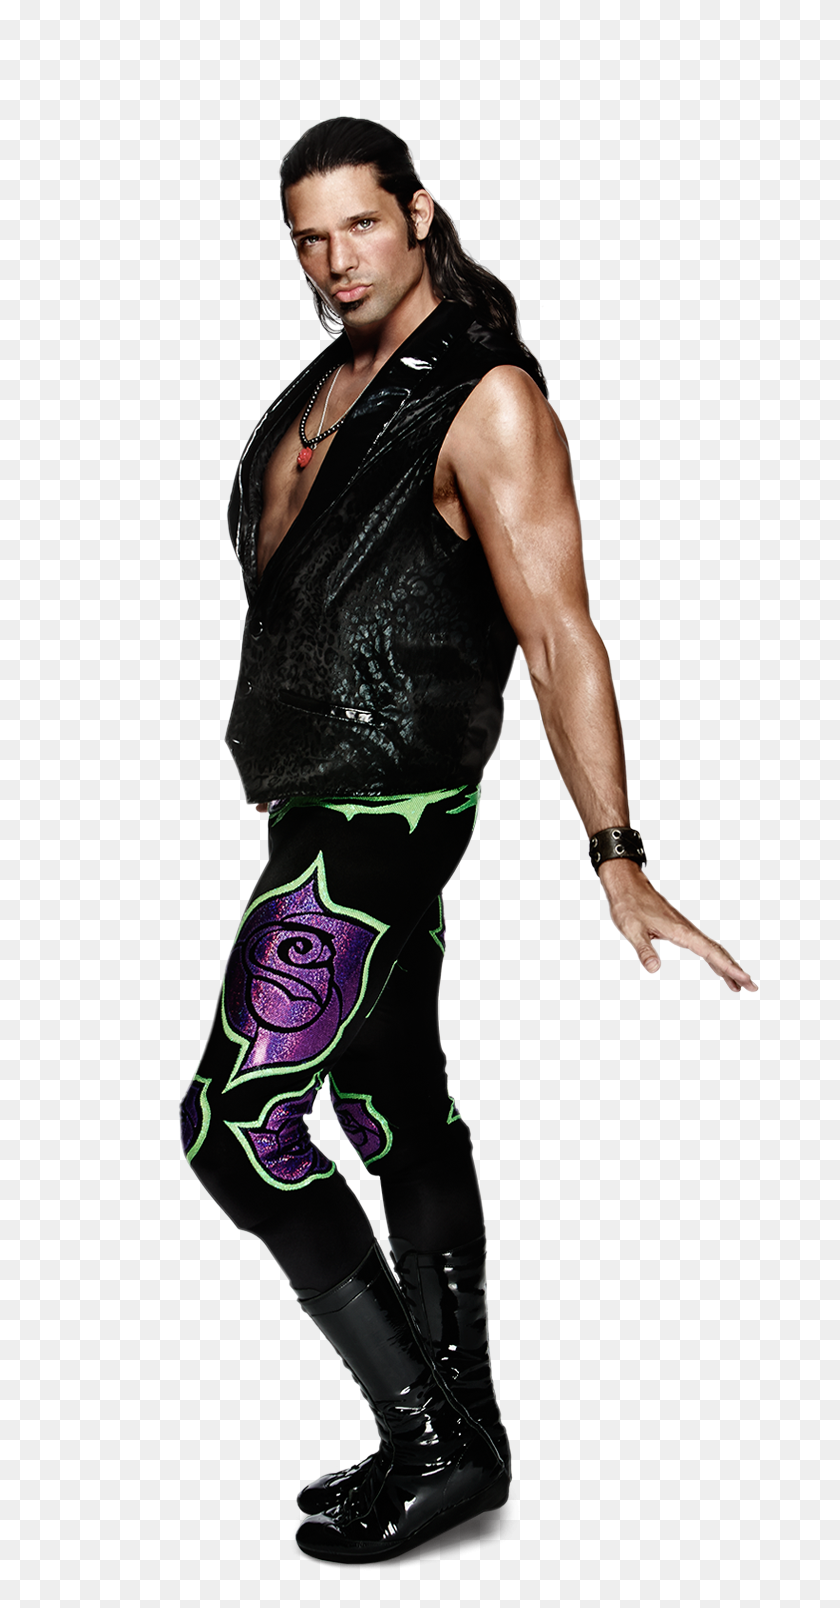 680x1548 Ray Leppan Transformation From Leo Kruger To Adam Rose - Charlotte Flair PNG